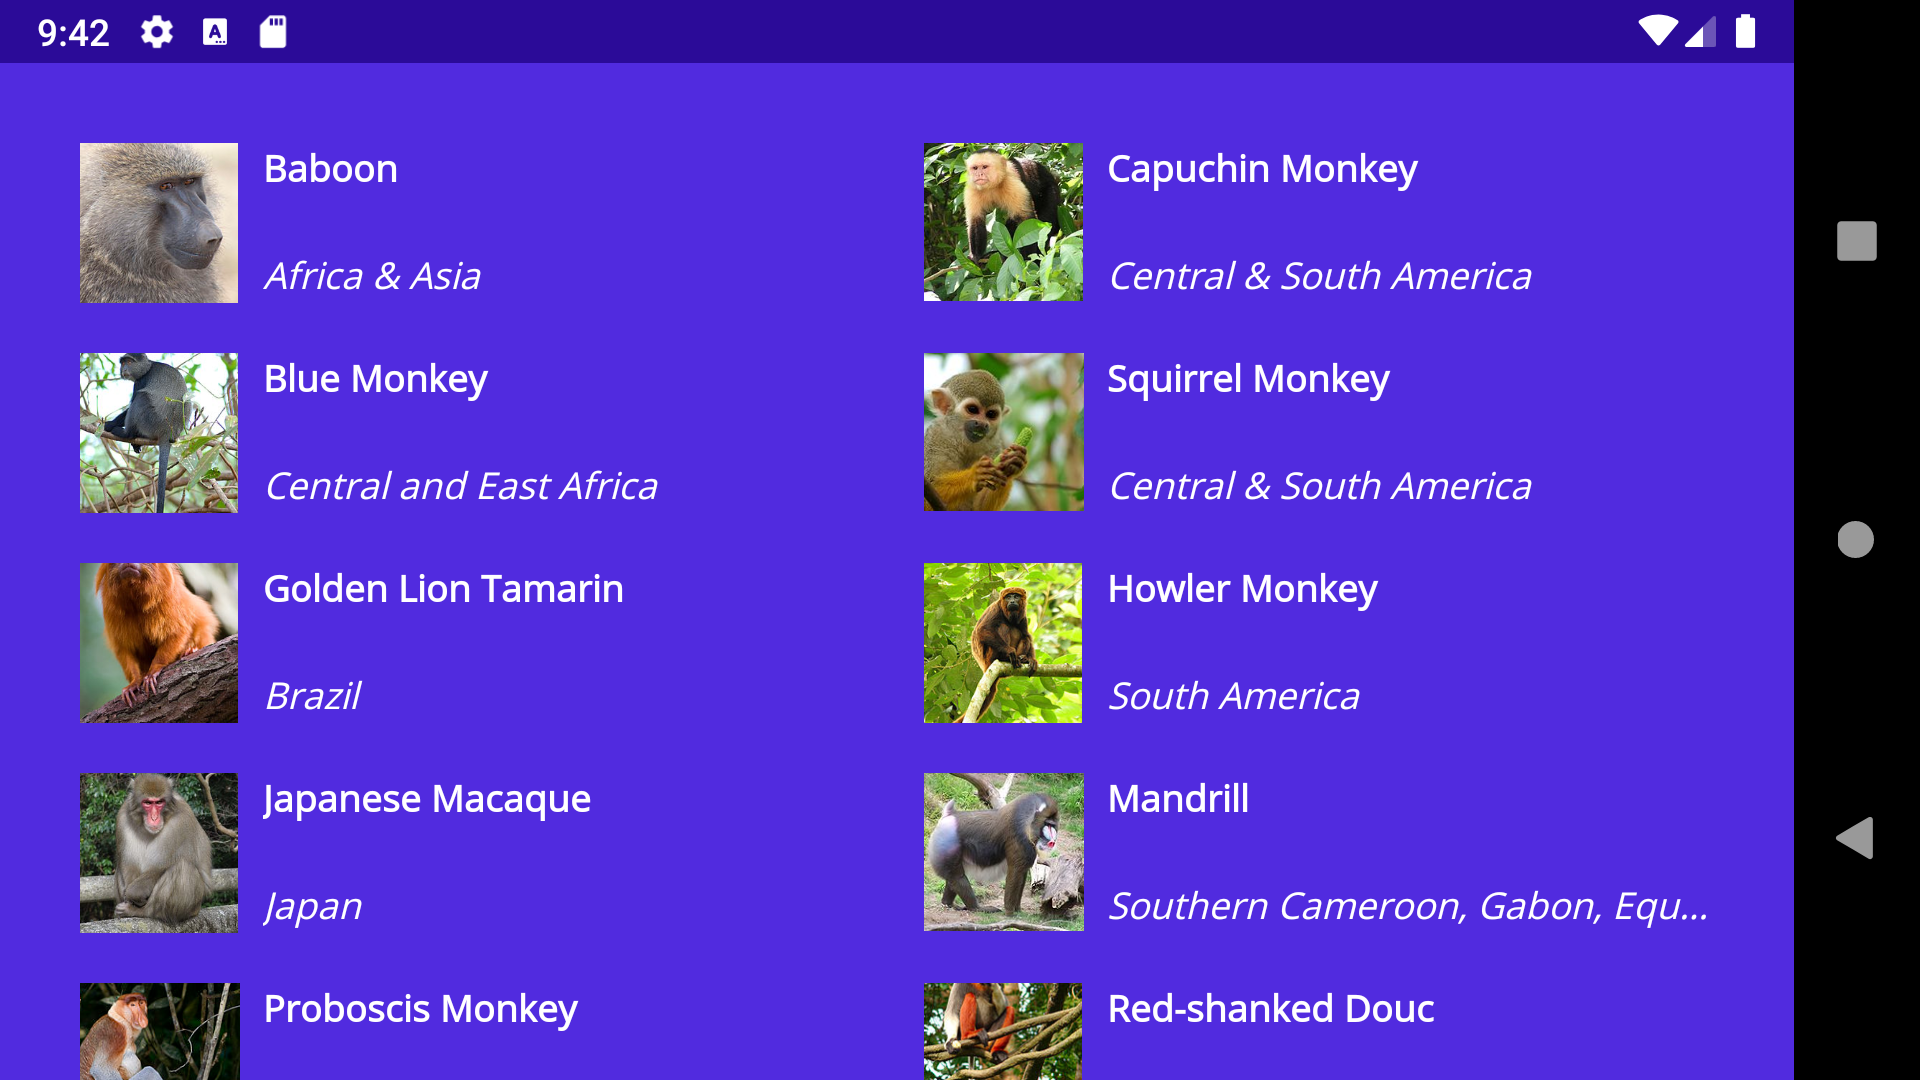 grid of monkeys displayed by a CollectionView control